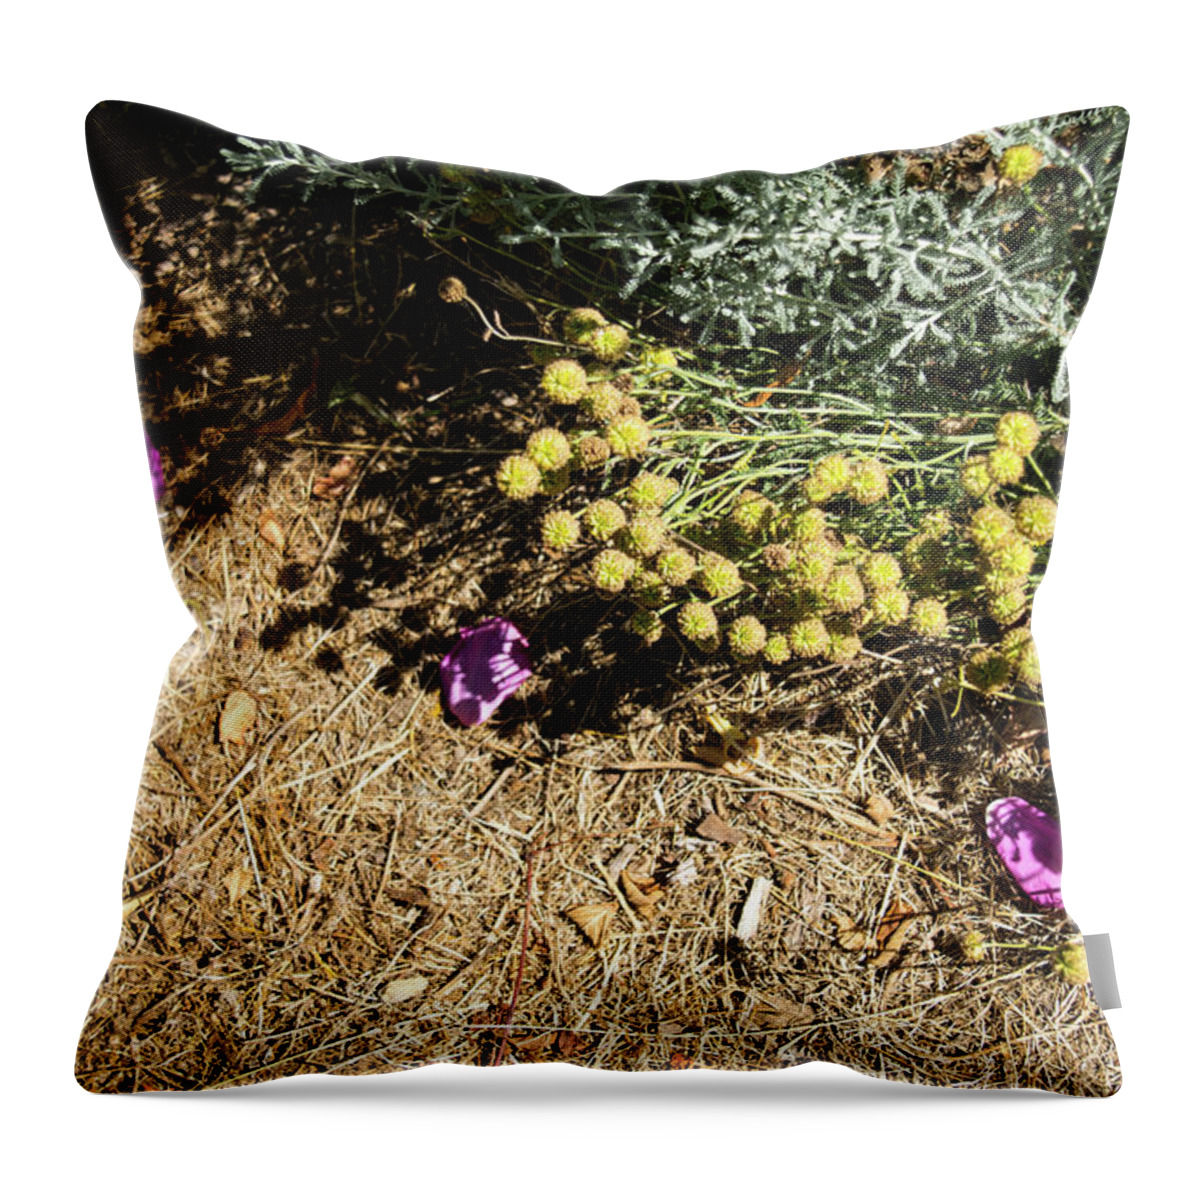 August Ground Cover Throw Pillow featuring the photograph August Ground Cover by Tom Cochran